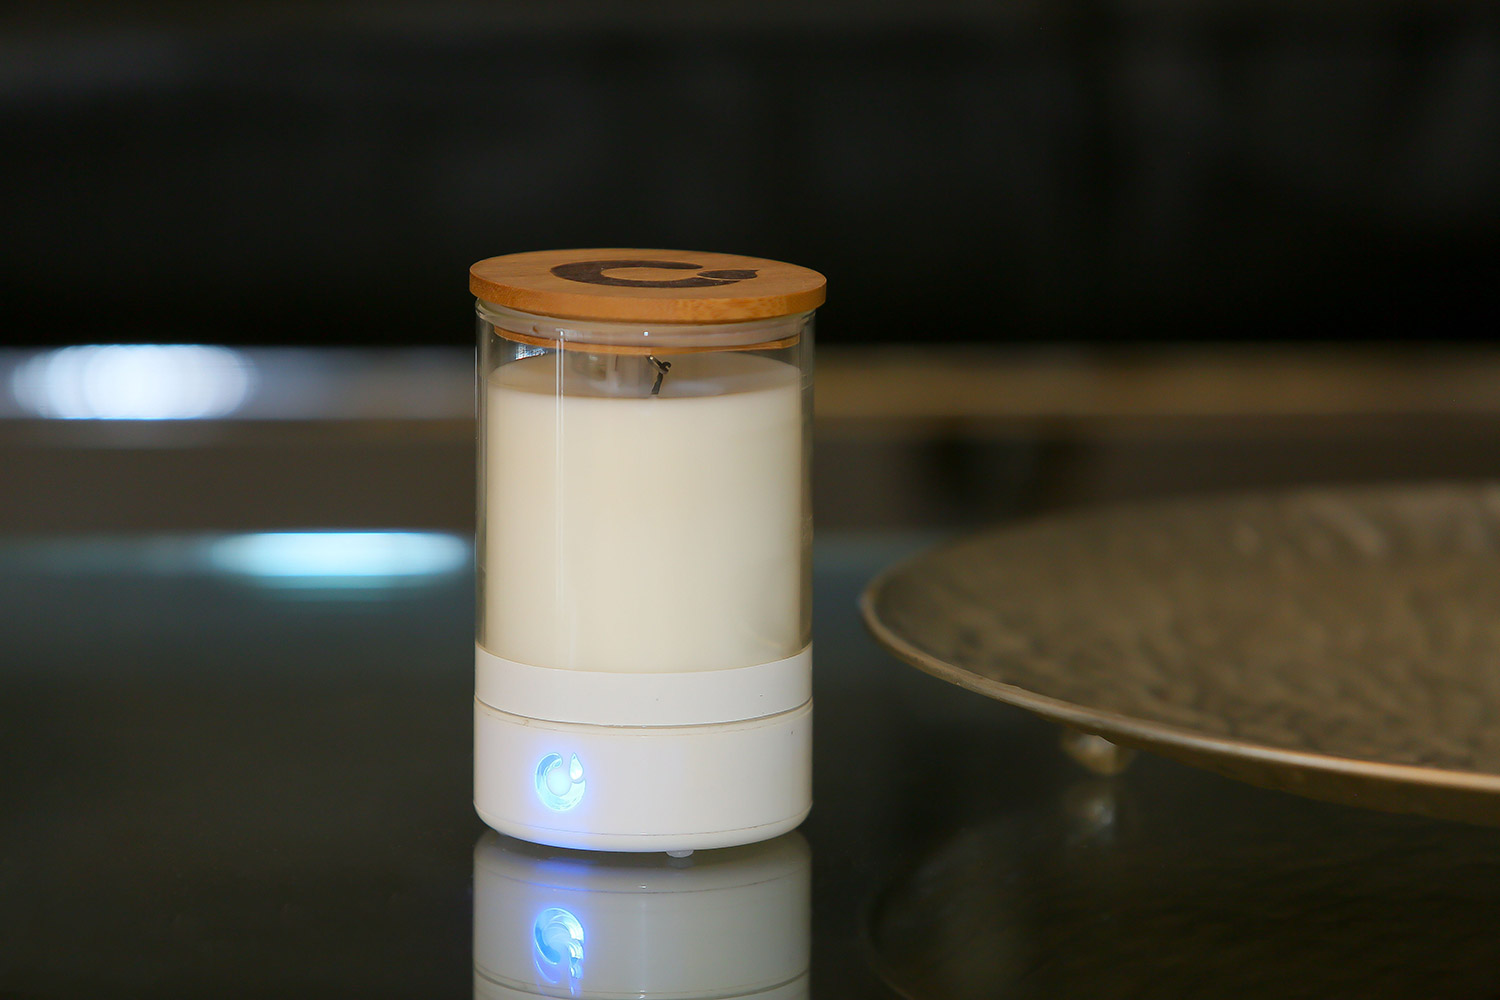 Candle Touch Smart Candle Ignites From Smart Phone - Light candle remotely from phone